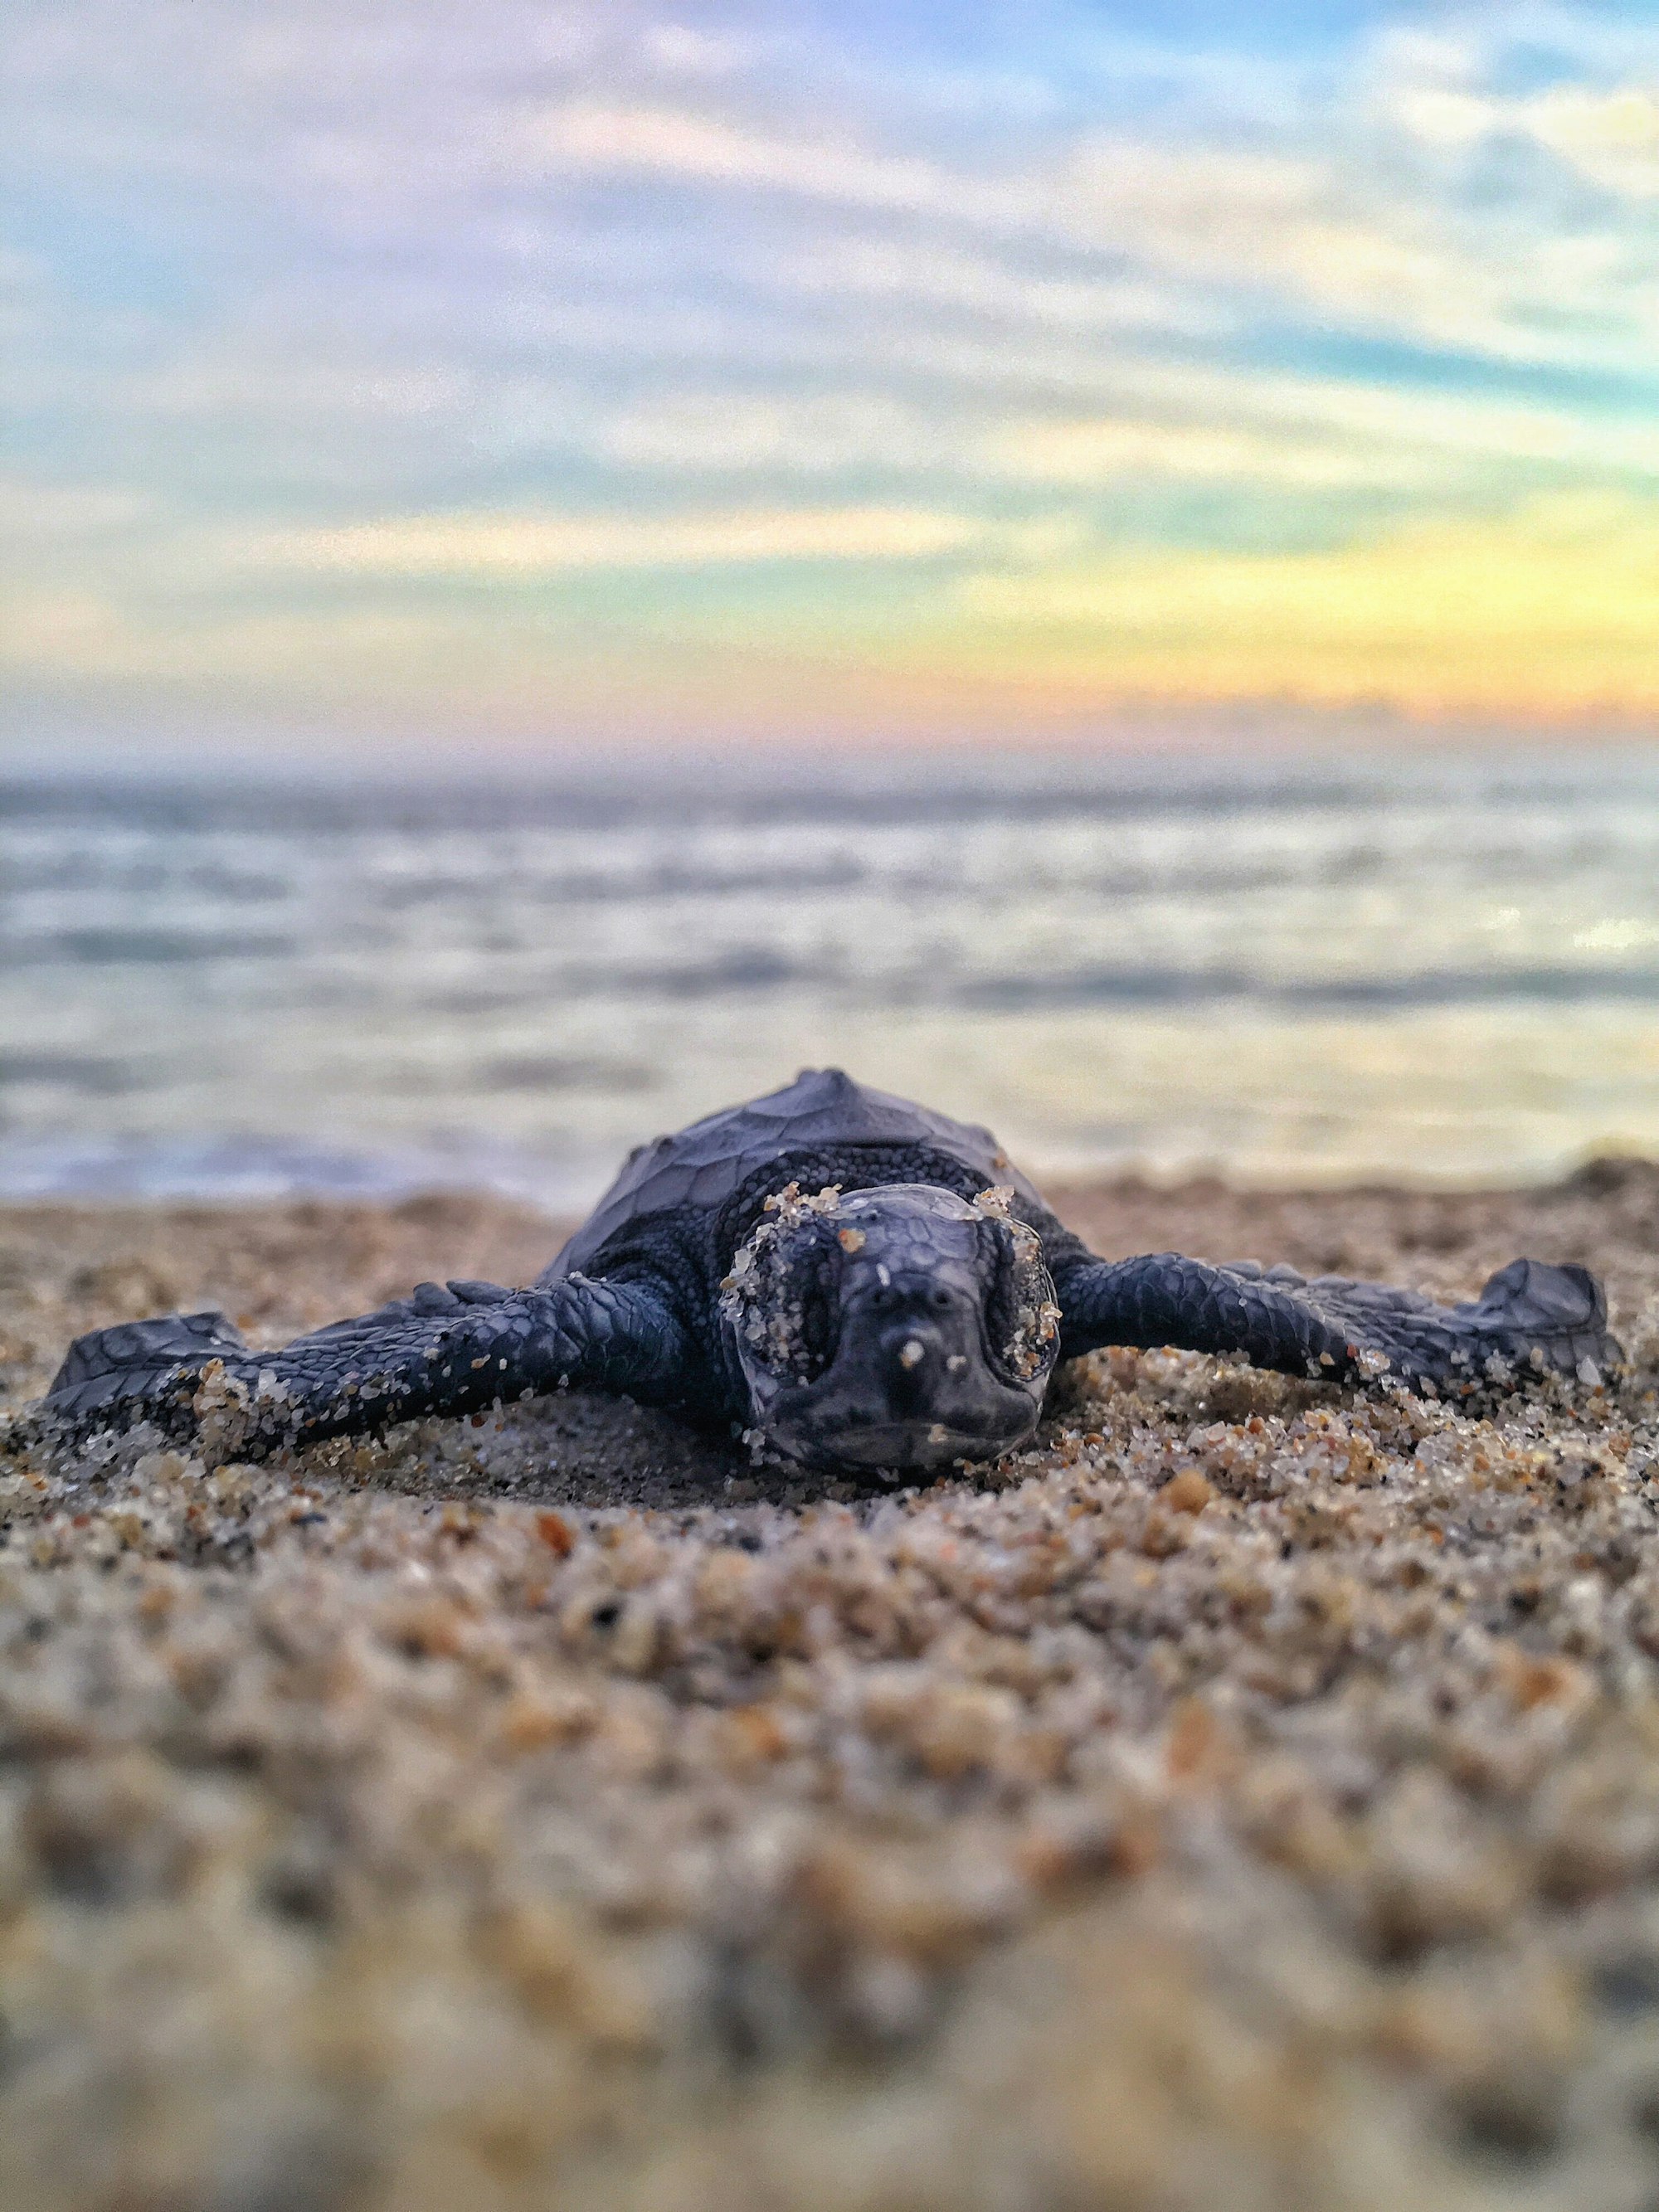 Once upon a time, we had the pleasure of witnessing the setting free of a legion of baby sea turtles. This cutie wasnâ€™t too much in a hurry and took some time out to strike a pose for me.